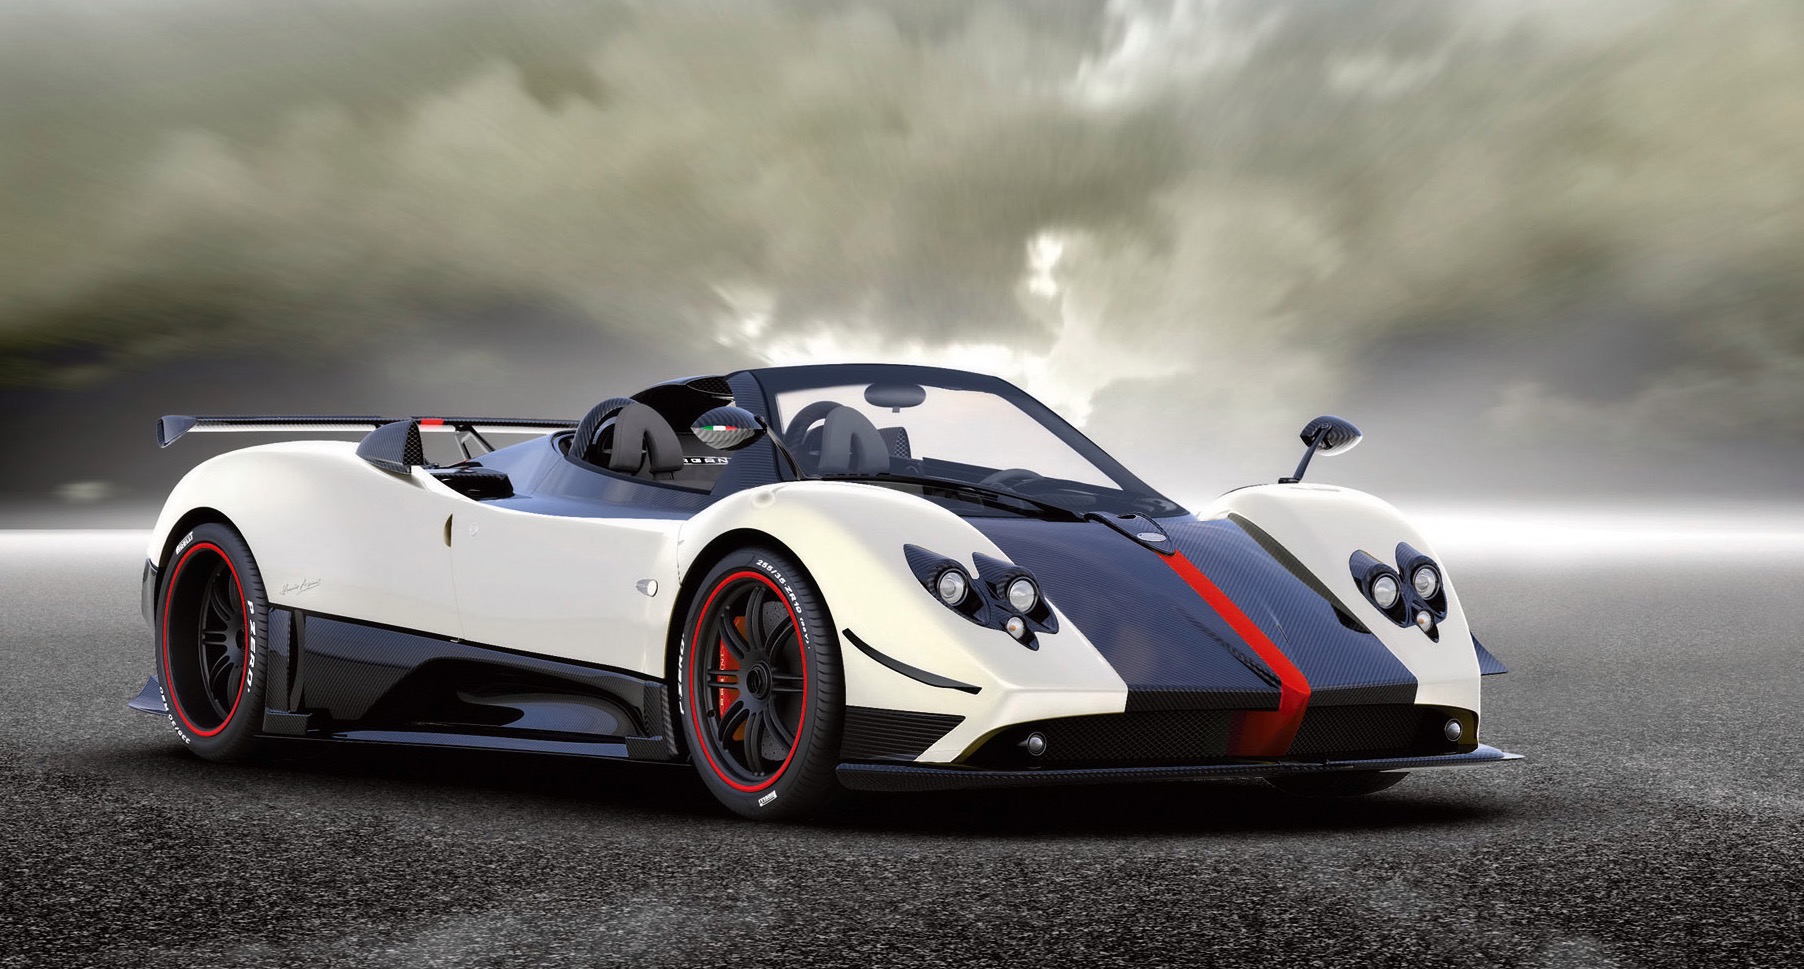 A rare Pagani Zonda worth £1.5million is the jewel of his car collection